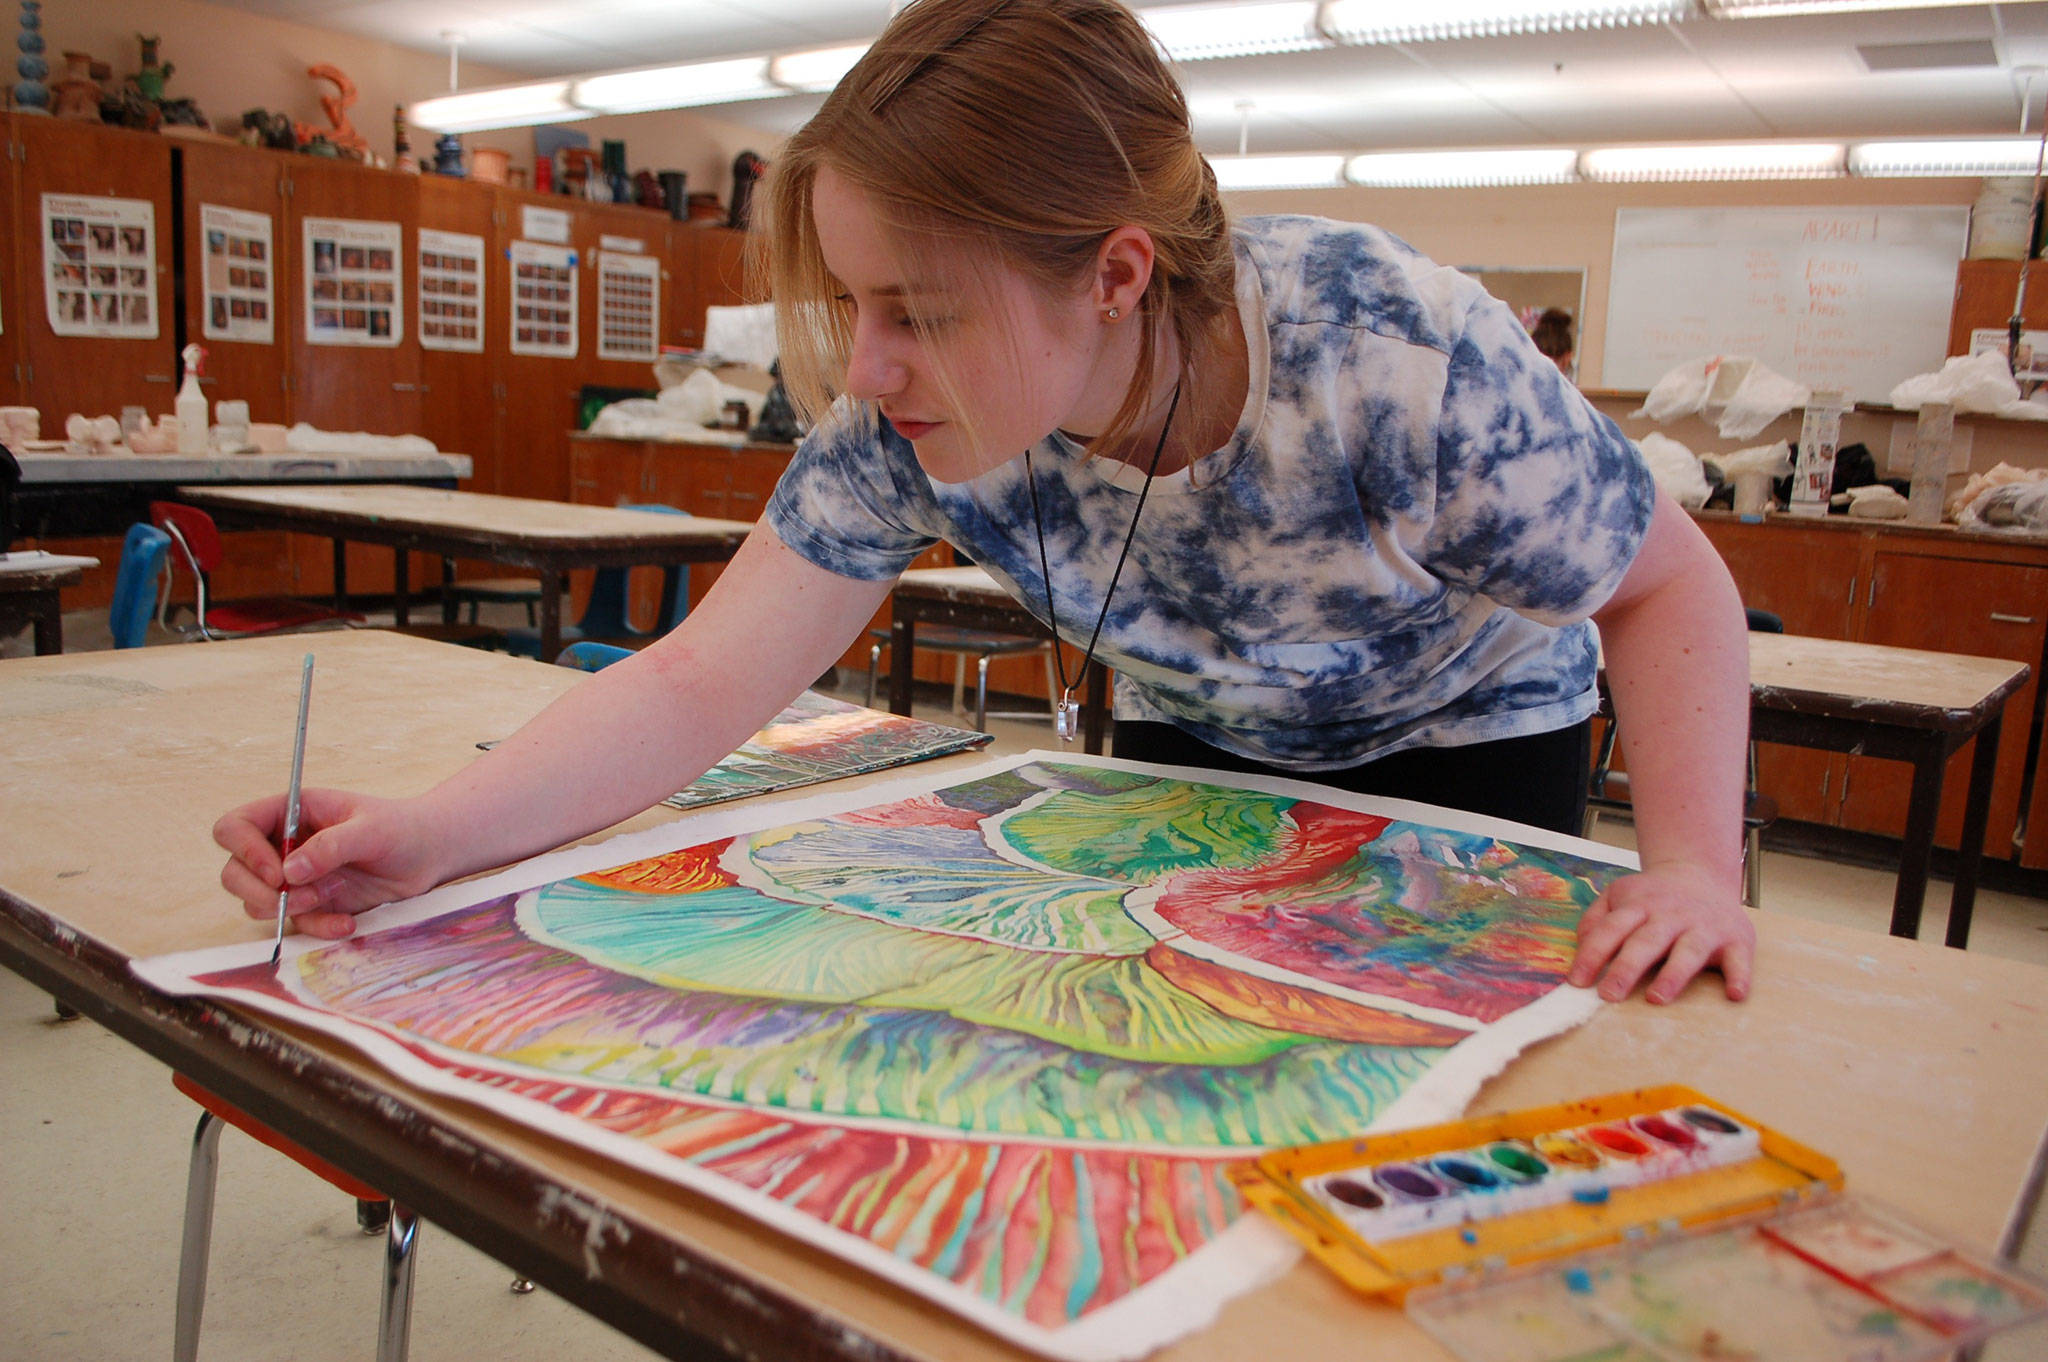 Sequim High School senior Haelee Andres touches up an abstract watercolor painting she is planning to submit to the Sequim Education Foundation Art Show on display at 6 p.m. on Friday, April 20, at the Sequim School District Board room. Sequim Gazette photo by Erin Hawkins